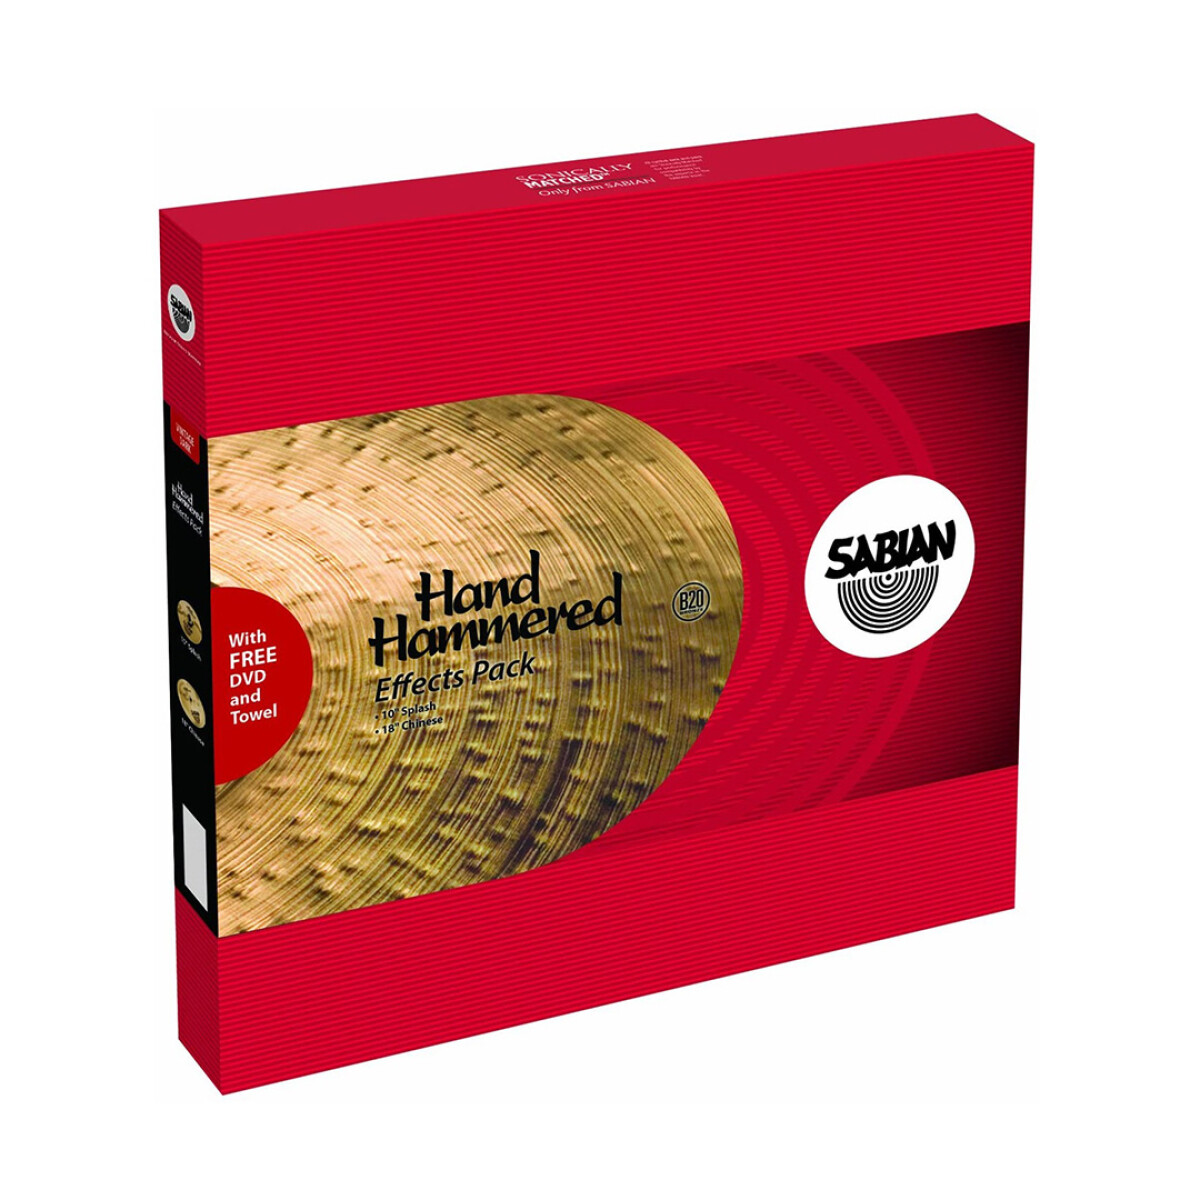 Platillo Pack/sabian Hh Effects 10/18 